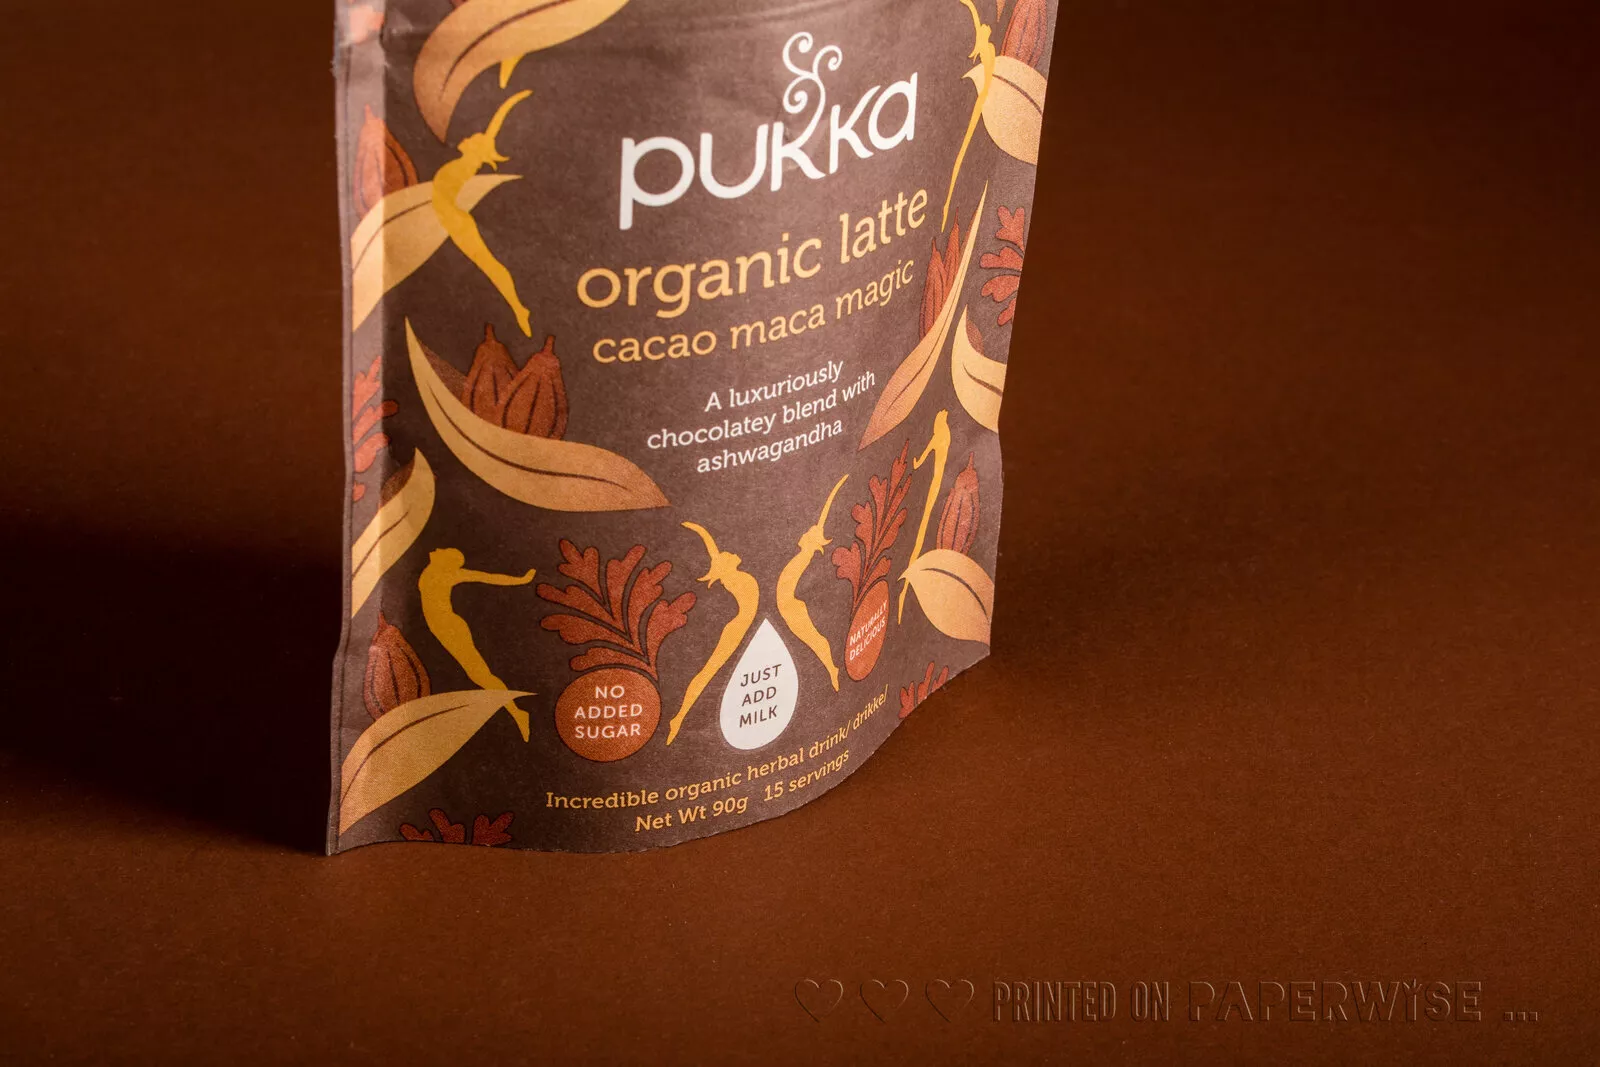 PaperWise sustainable paperorganic board pouch tea coffee latte environmentally responsible packaging Pukka8